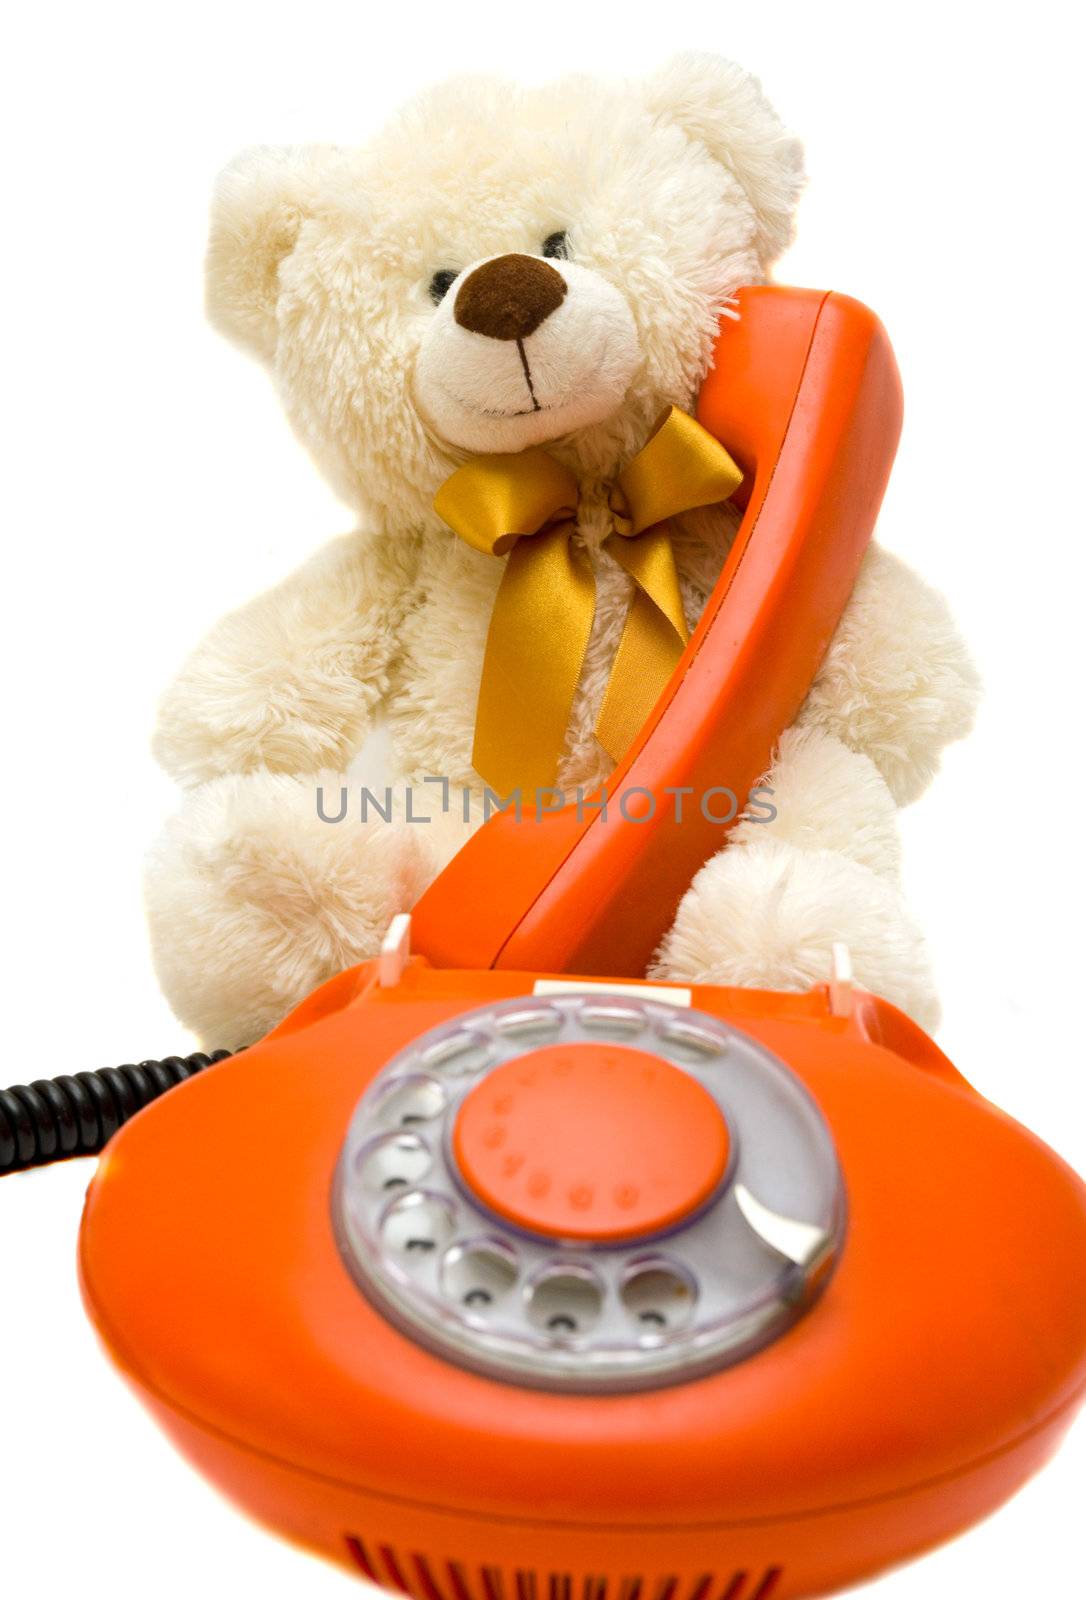 old red phone and bear toy teddy